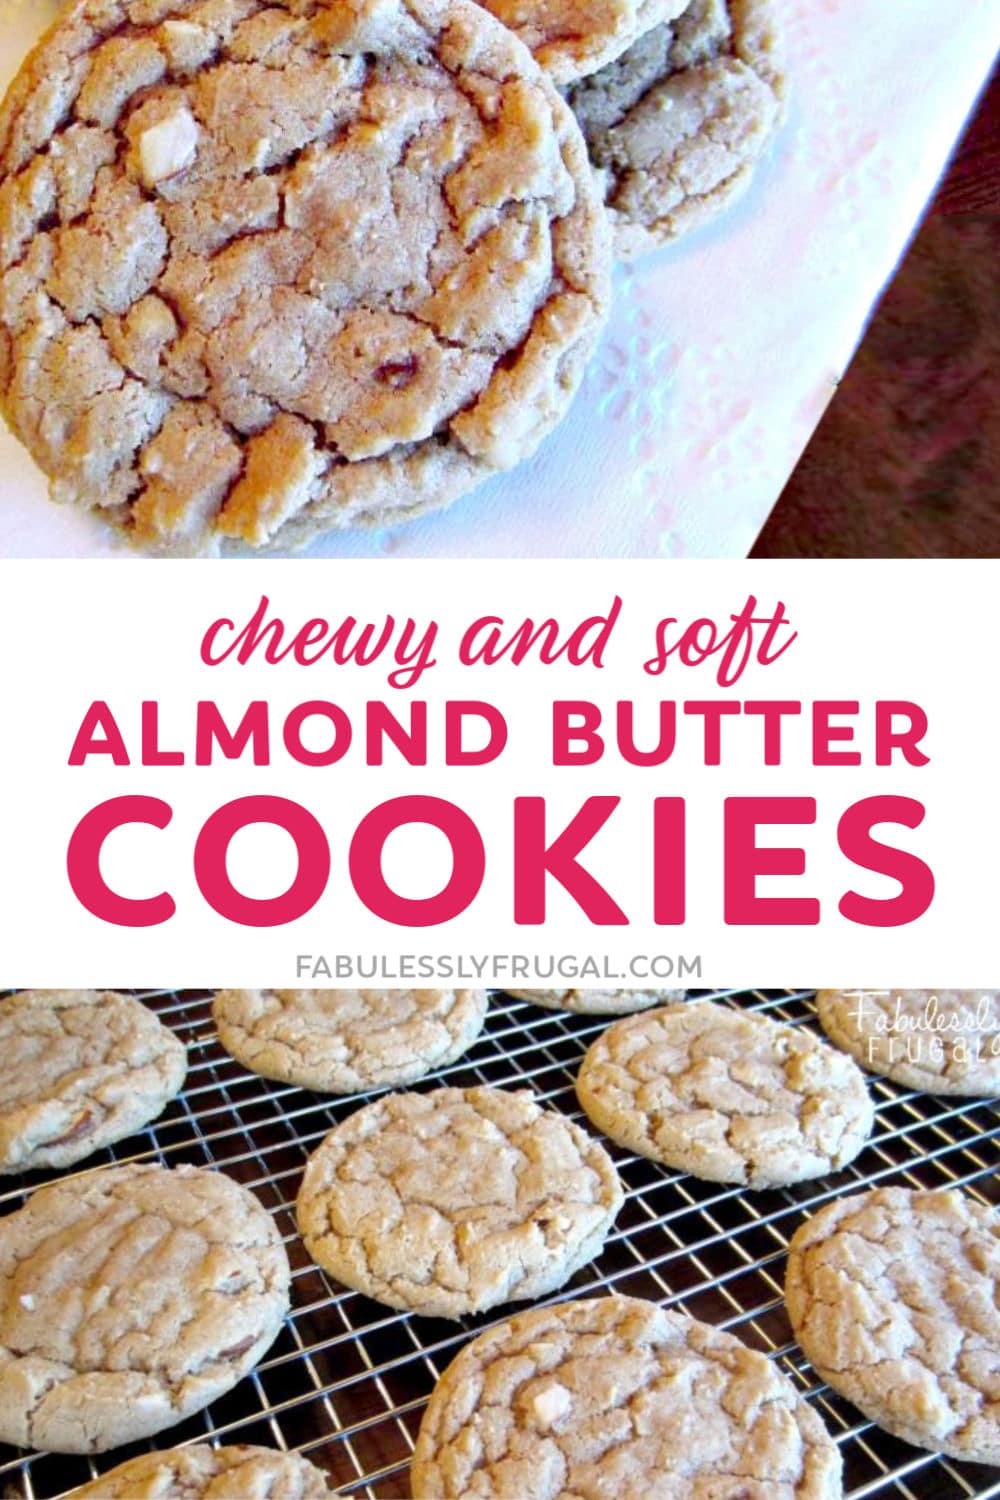 Chewy almond butter cookies recipe